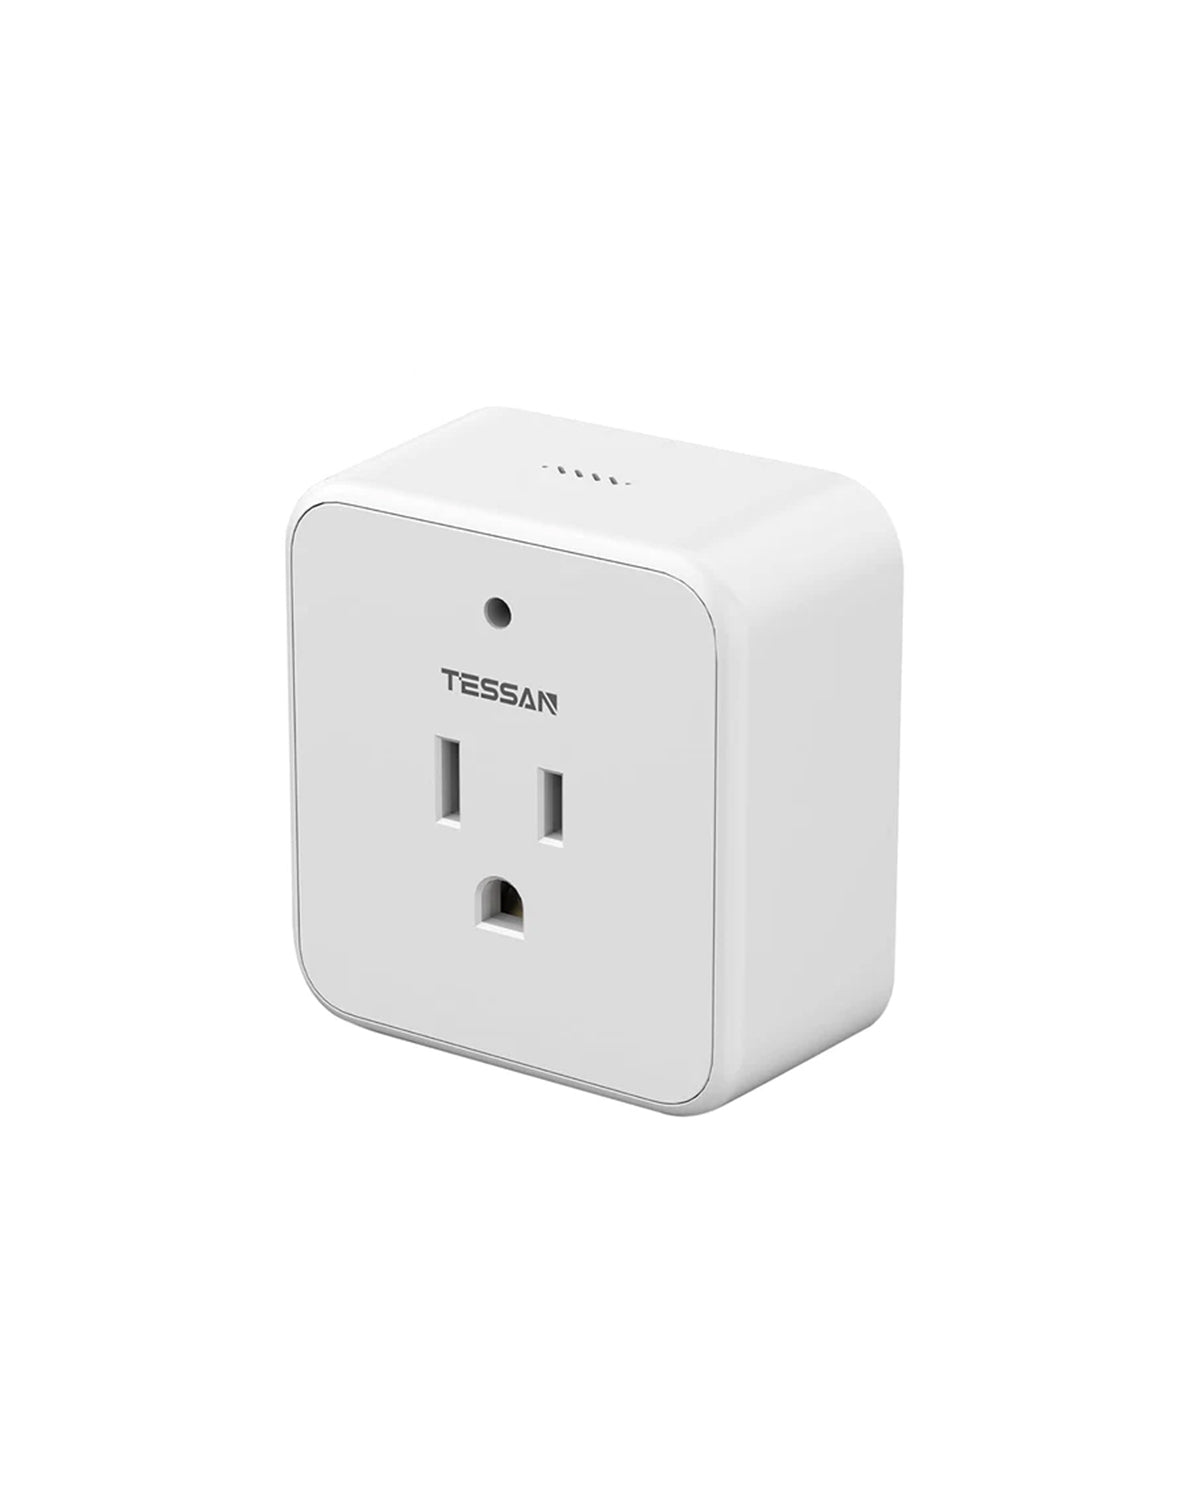 TESSAN Voice Control Outlet, Wireless Remote Control Electrical Outlet, 10A/1250W